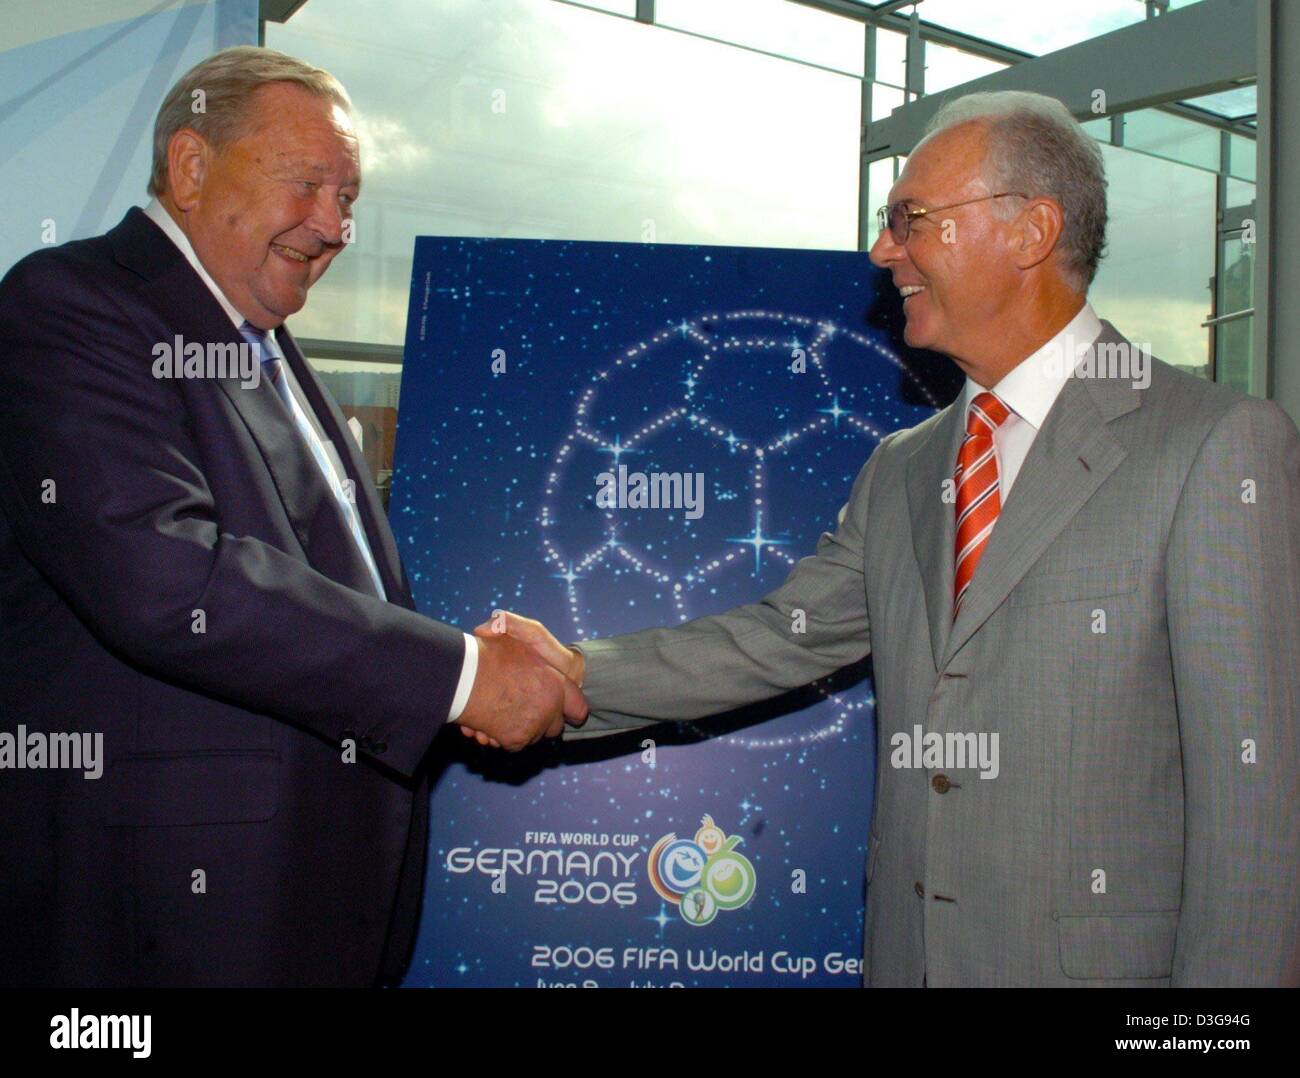 (dpa) - Lennart Johansson (L), UEFA President and FIFA World Cup Organizing Committee Chairman, and Franz Beckenbauer, Head of the German World Cup 2006 Organizing Committee, present the official poster for the 2006 FIFA Soccer World Cup at the new art museum in Stuttgart, Germany, 30 September 2004. Franz Beckenbauer could visualise himself as the successor of UEFA President Lenna Stock Photo